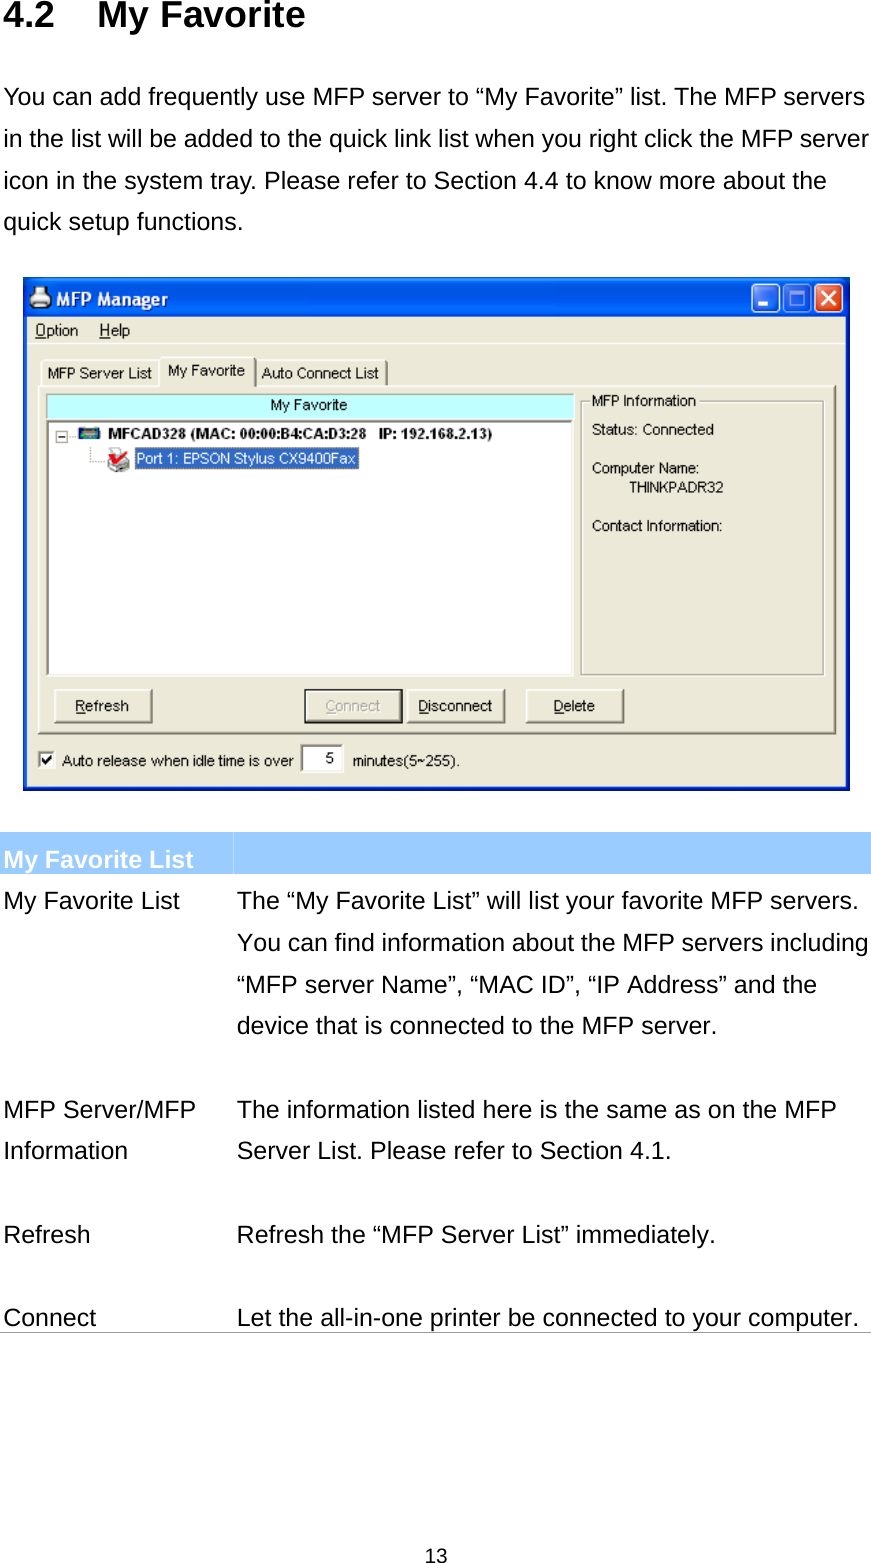 13 4.2 My Favorite You can add frequently use MFP server to “My Favorite” list. The MFP servers in the list will be added to the quick link list when you right click the MFP server icon in the system tray. Please refer to Section 4.4 to know more about the quick setup functions.    My Favorite List   My Favorite List  The “My Favorite List” will list your favorite MFP servers. You can find information about the MFP servers including “MFP server Name”, “MAC ID”, “IP Address” and the device that is connected to the MFP server.   MFP Server/MFP Information The information listed here is the same as on the MFP Server List. Please refer to Section 4.1.   Refresh  Refresh the “MFP Server List” immediately.   Connect  Let the all-in-one printer be connected to your computer.    